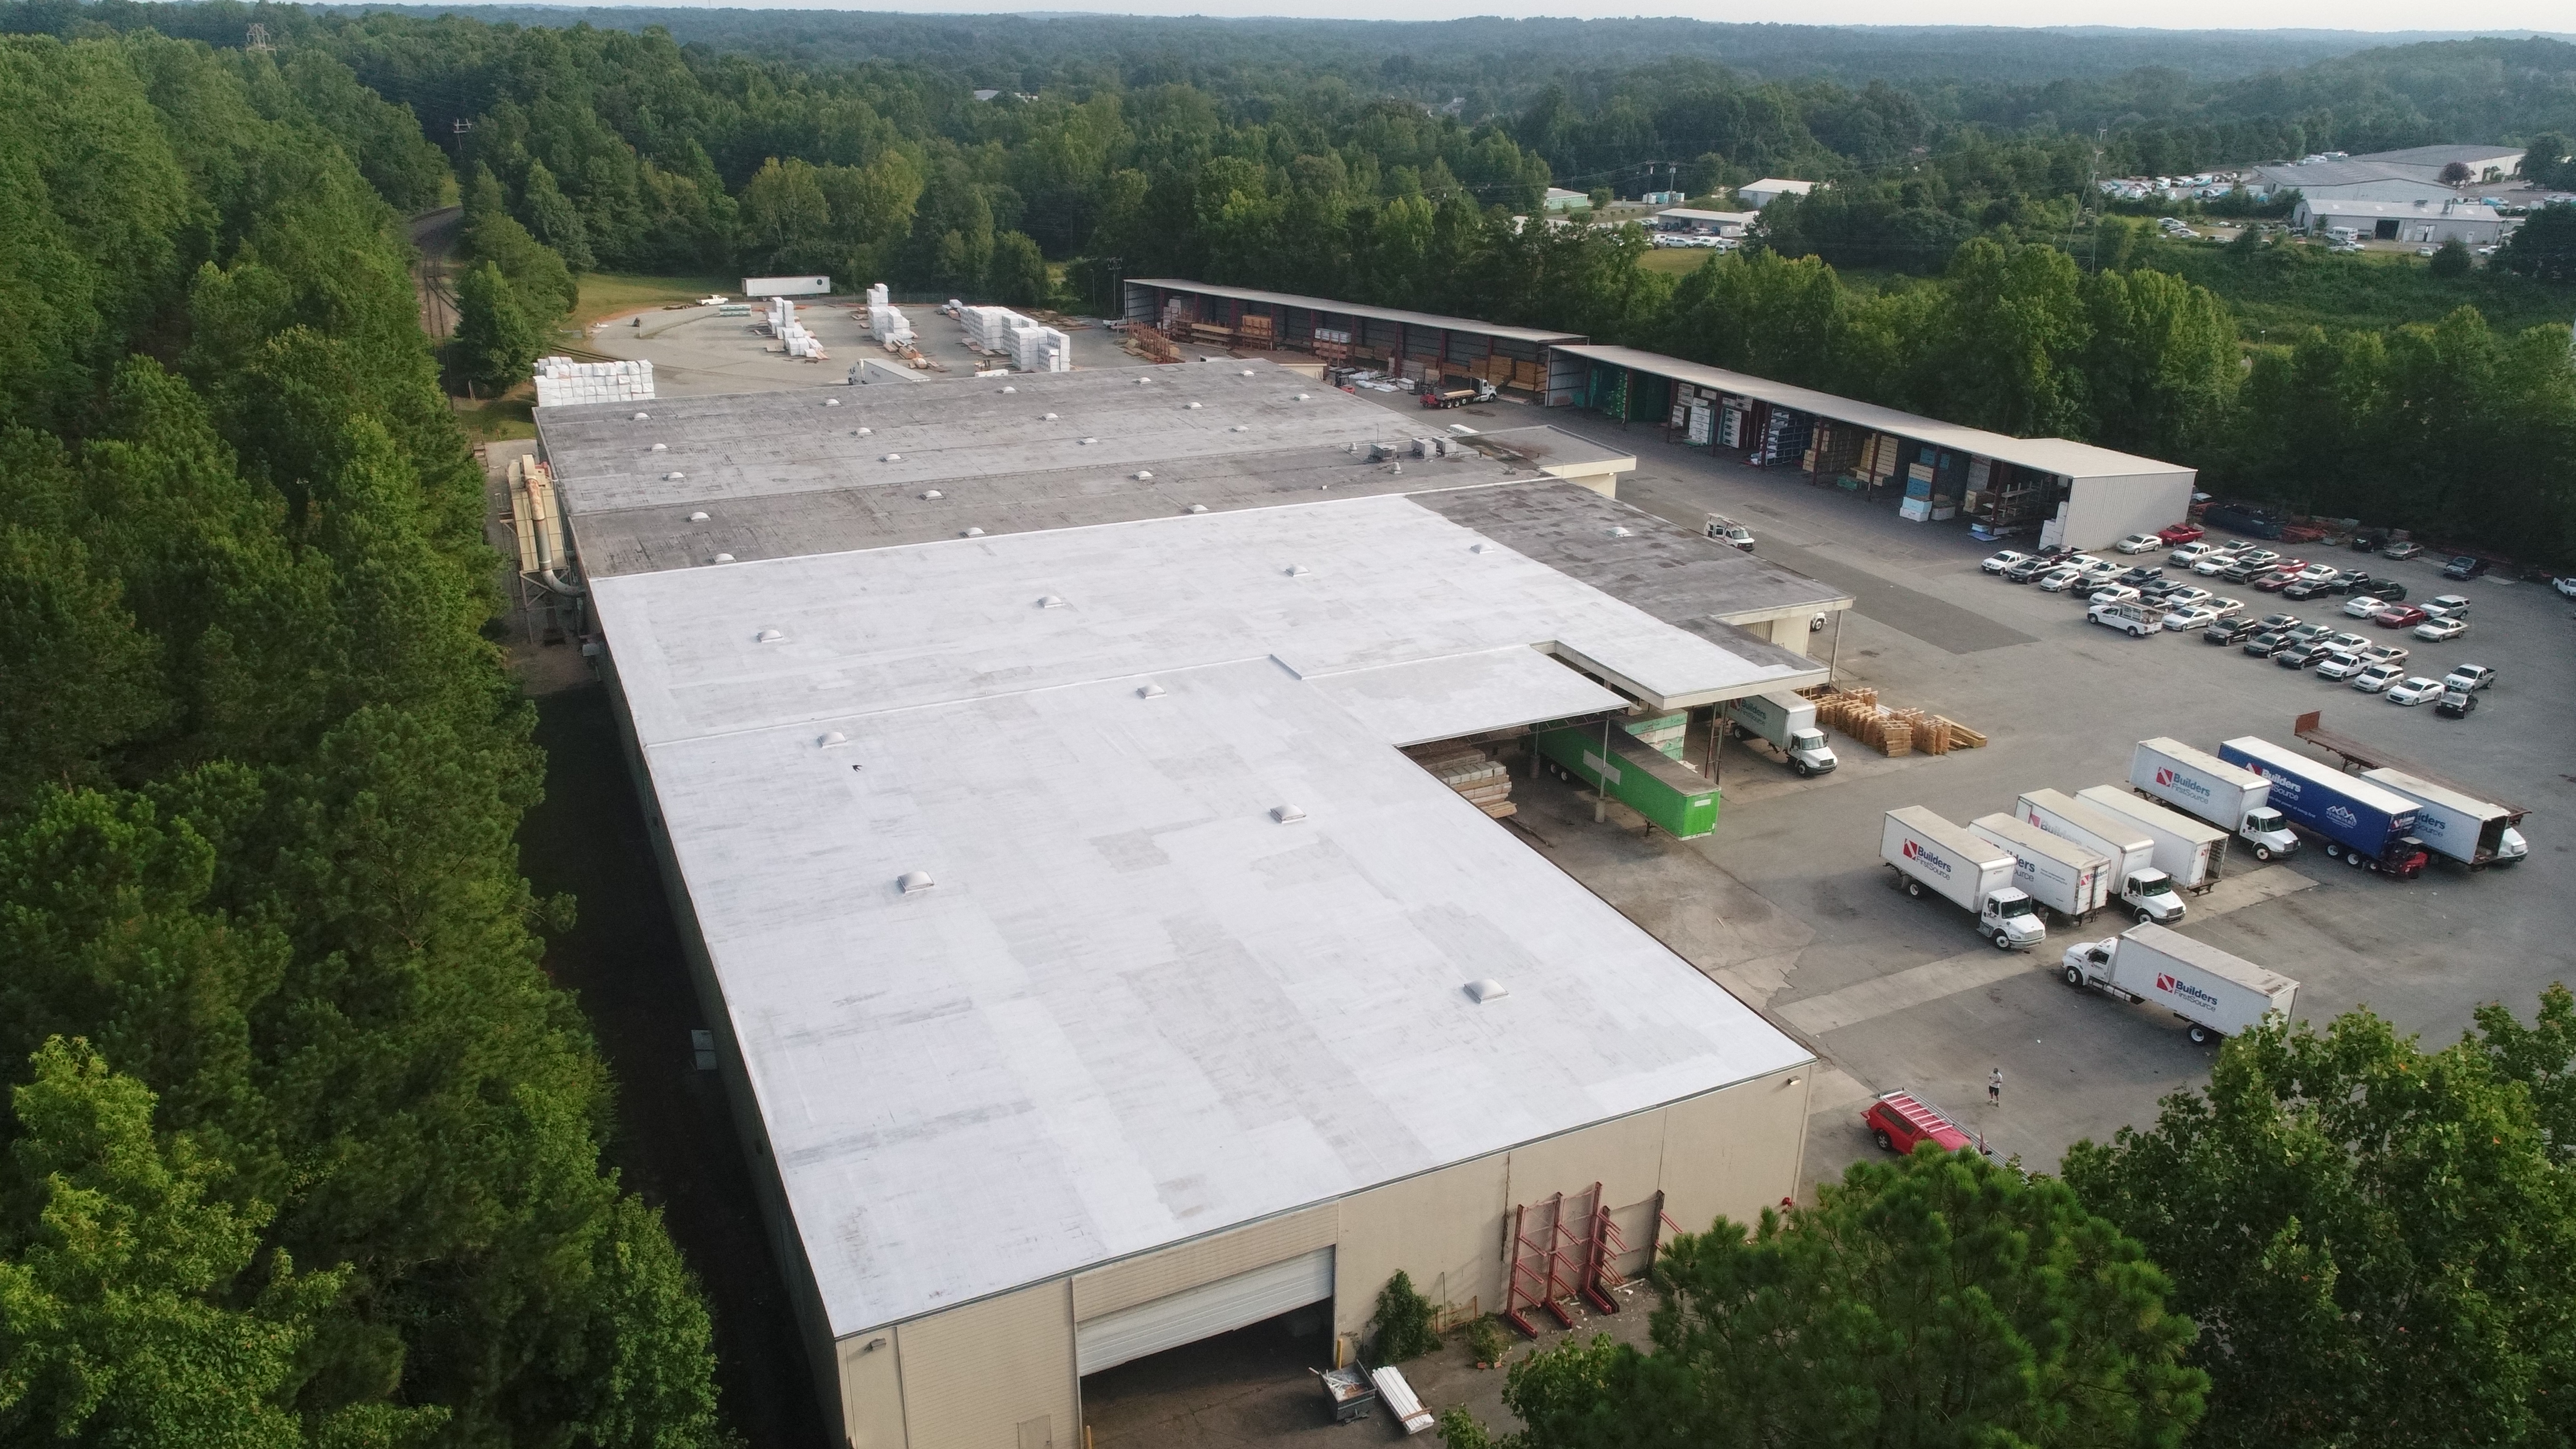 BuiltUp Roofing (BUR) for Commercial Roofs